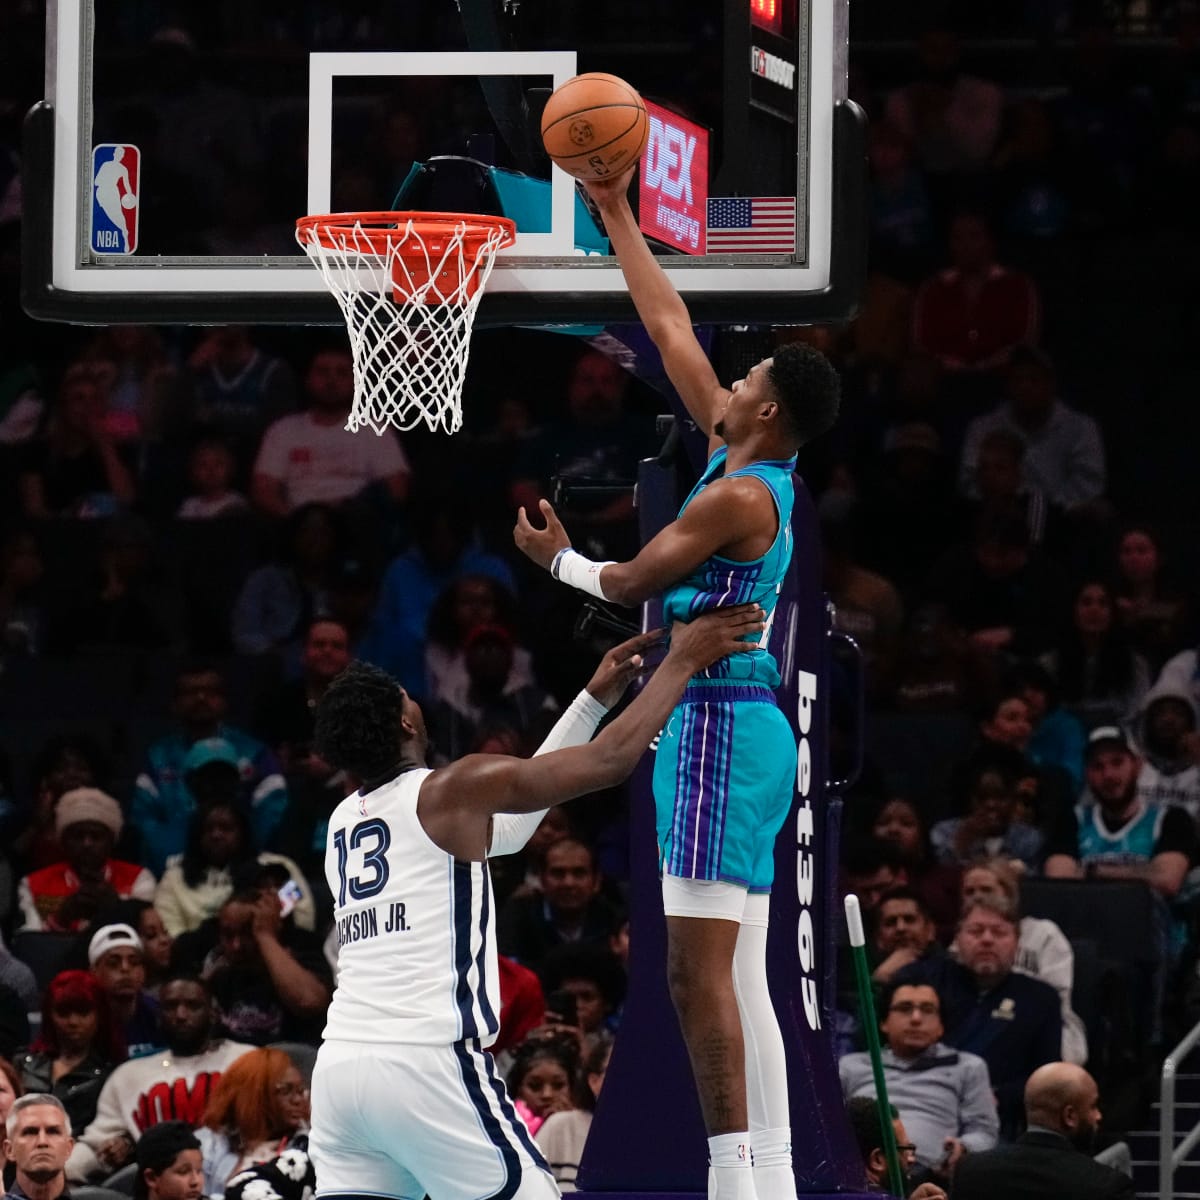 The ONE thing Brandon Miller needs to focus on to secure his spot in the  Charlotte Hornets rotation